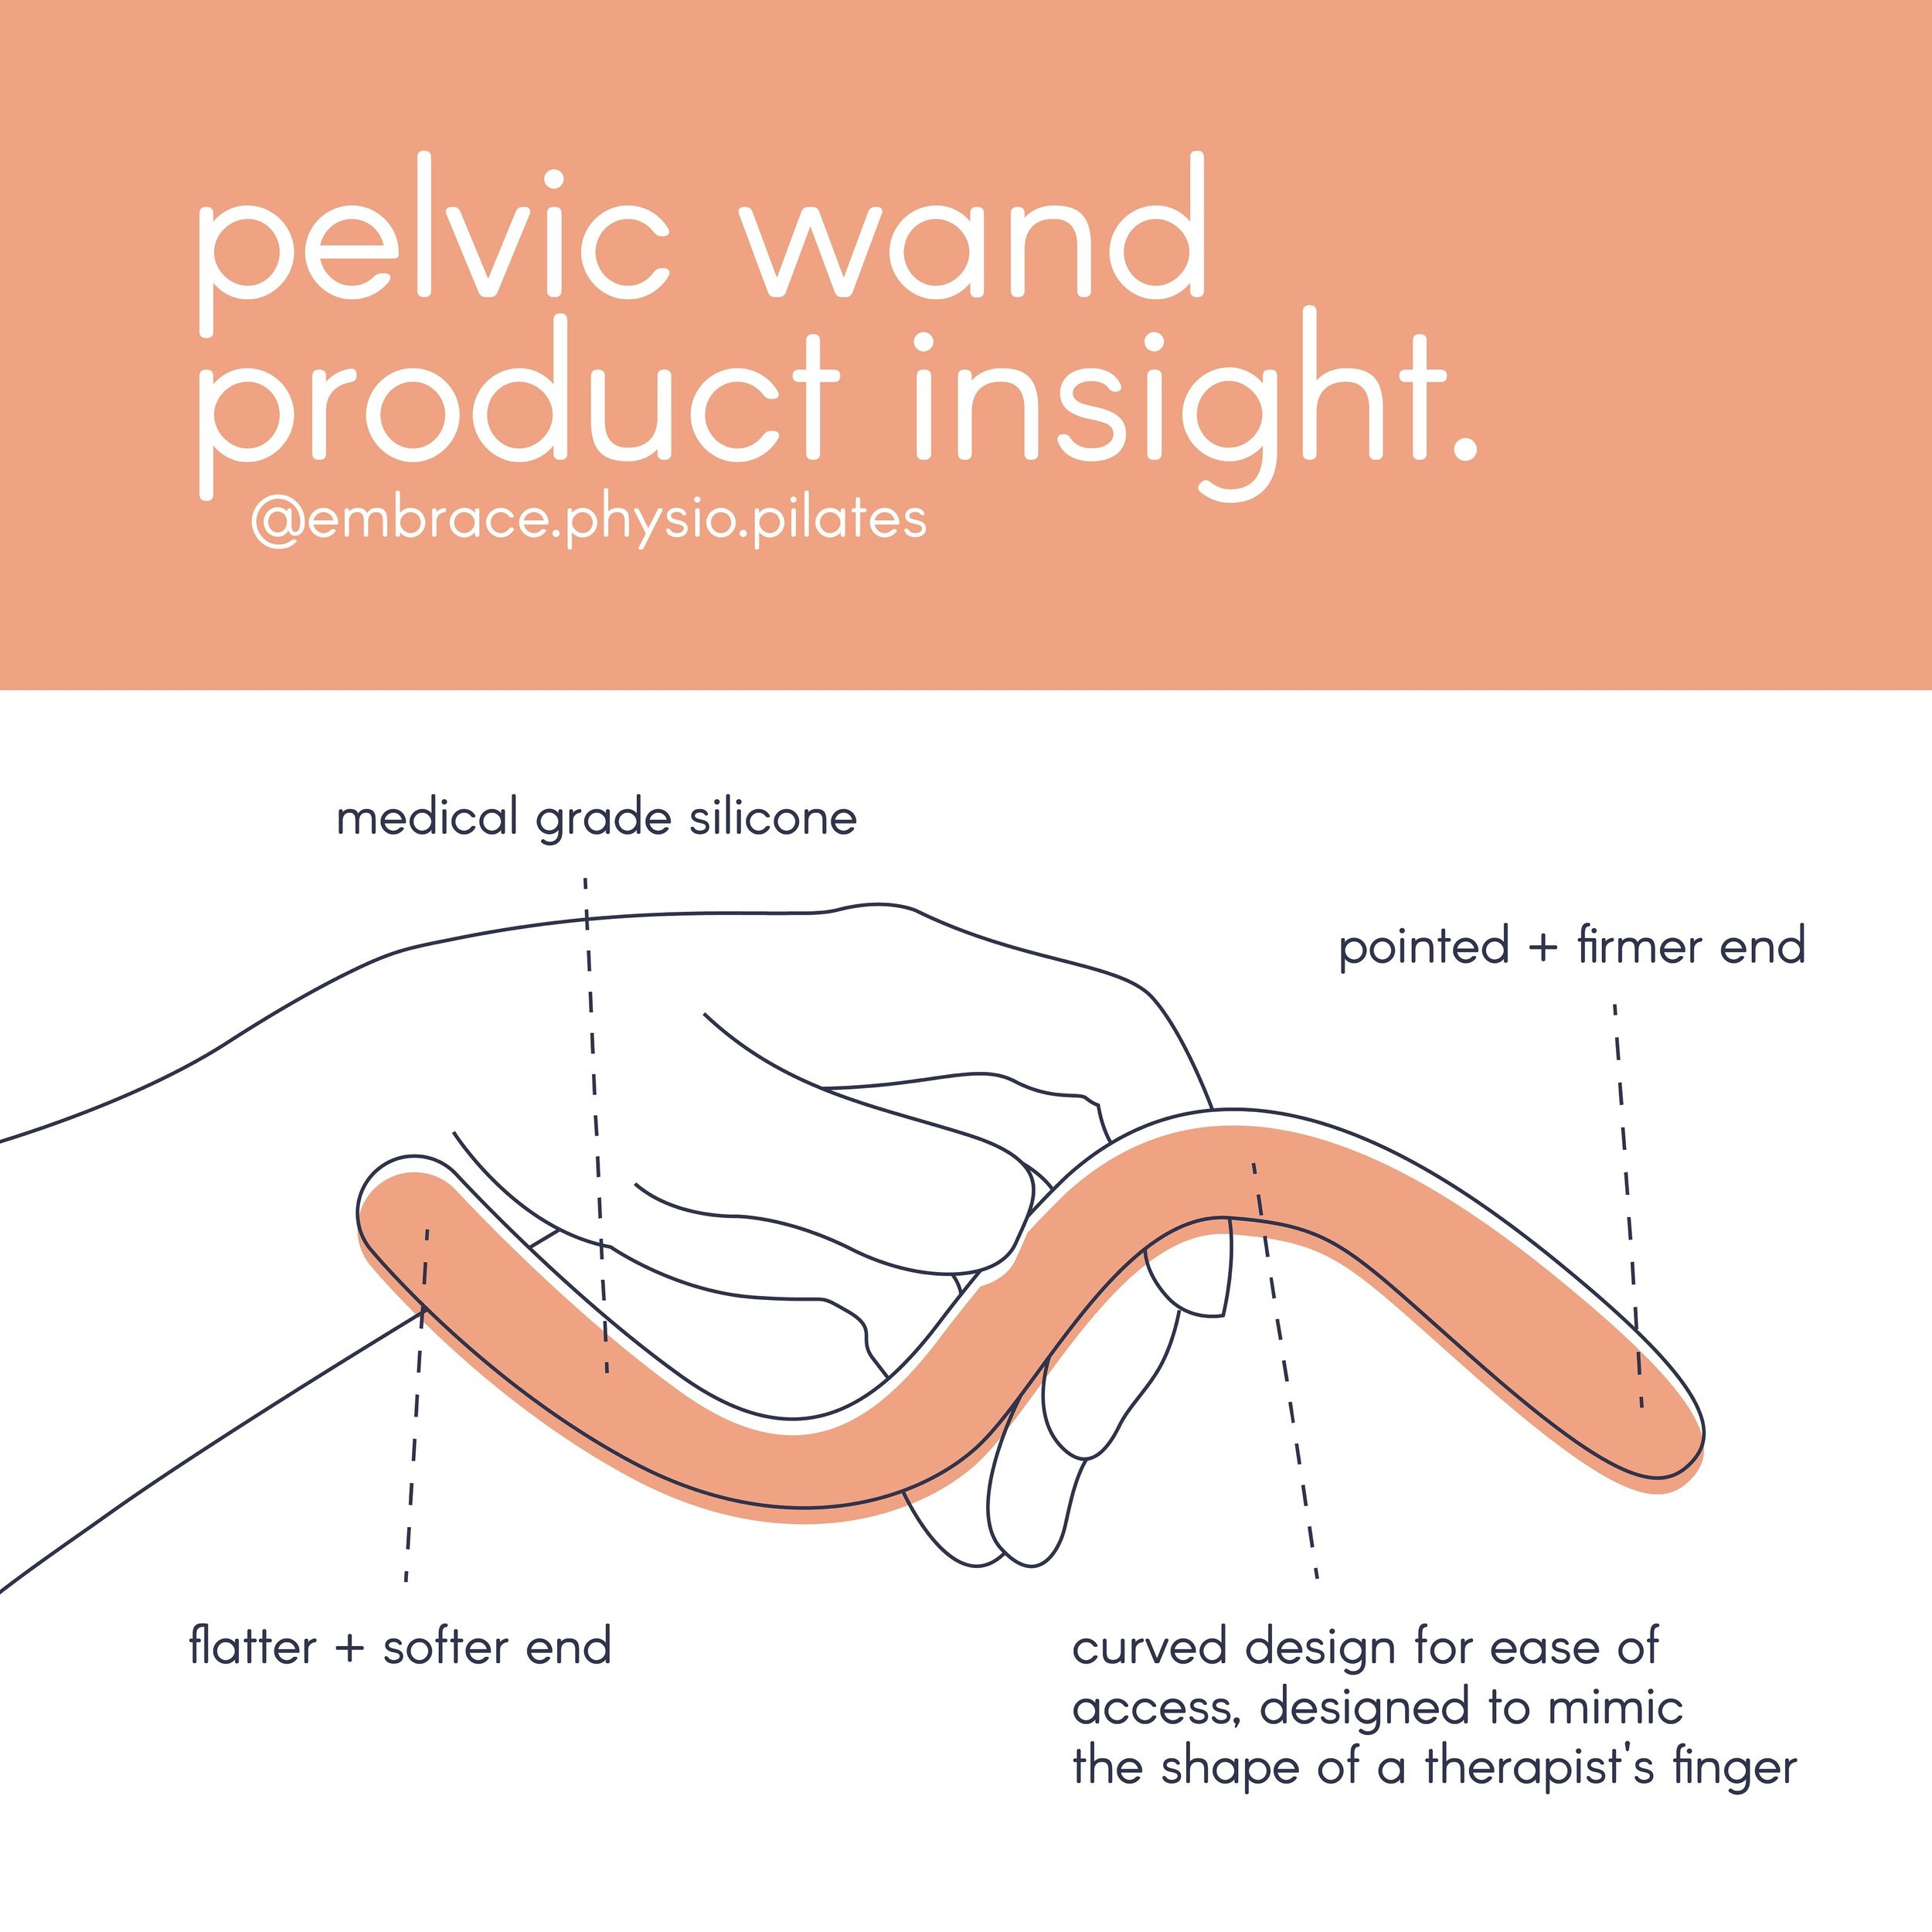 Pelvic floor wands are a great tool women&rsquo;s health physios commonly recommend to help release tight and painful pelvic floor muscles. It can be used to reach the deep layer of your pelvic floor muscle and is something you can do from the comfor